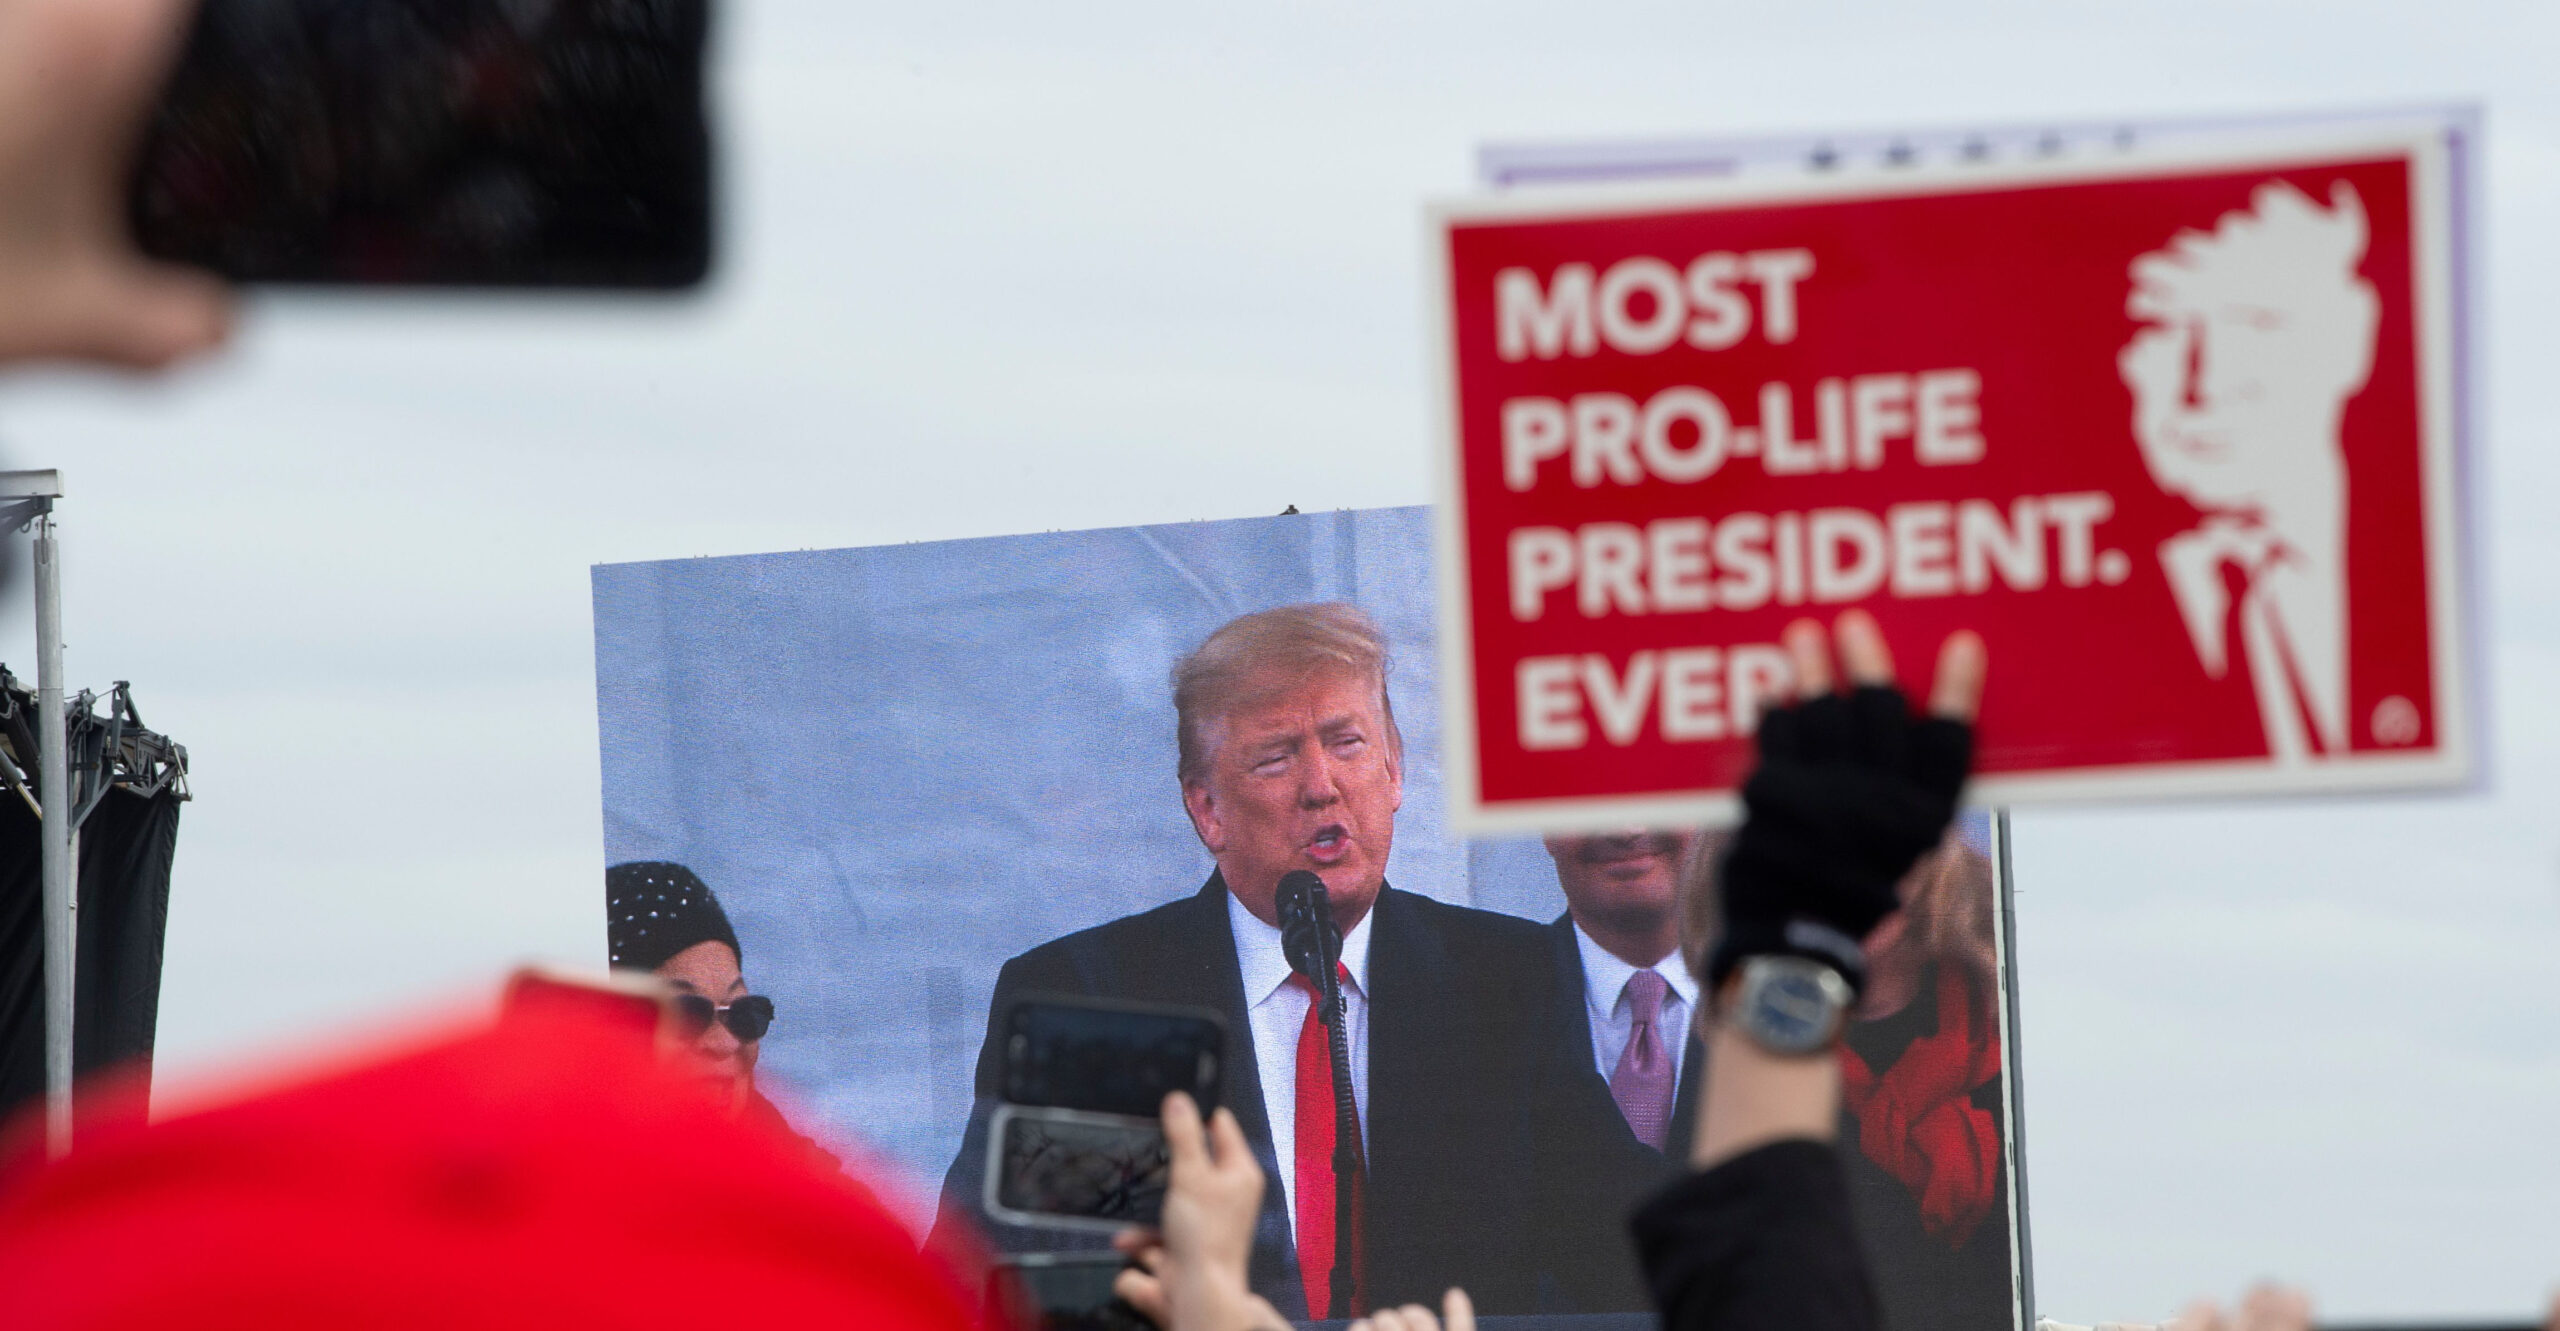 Trump Moves to Expand International Pro-Life Policy